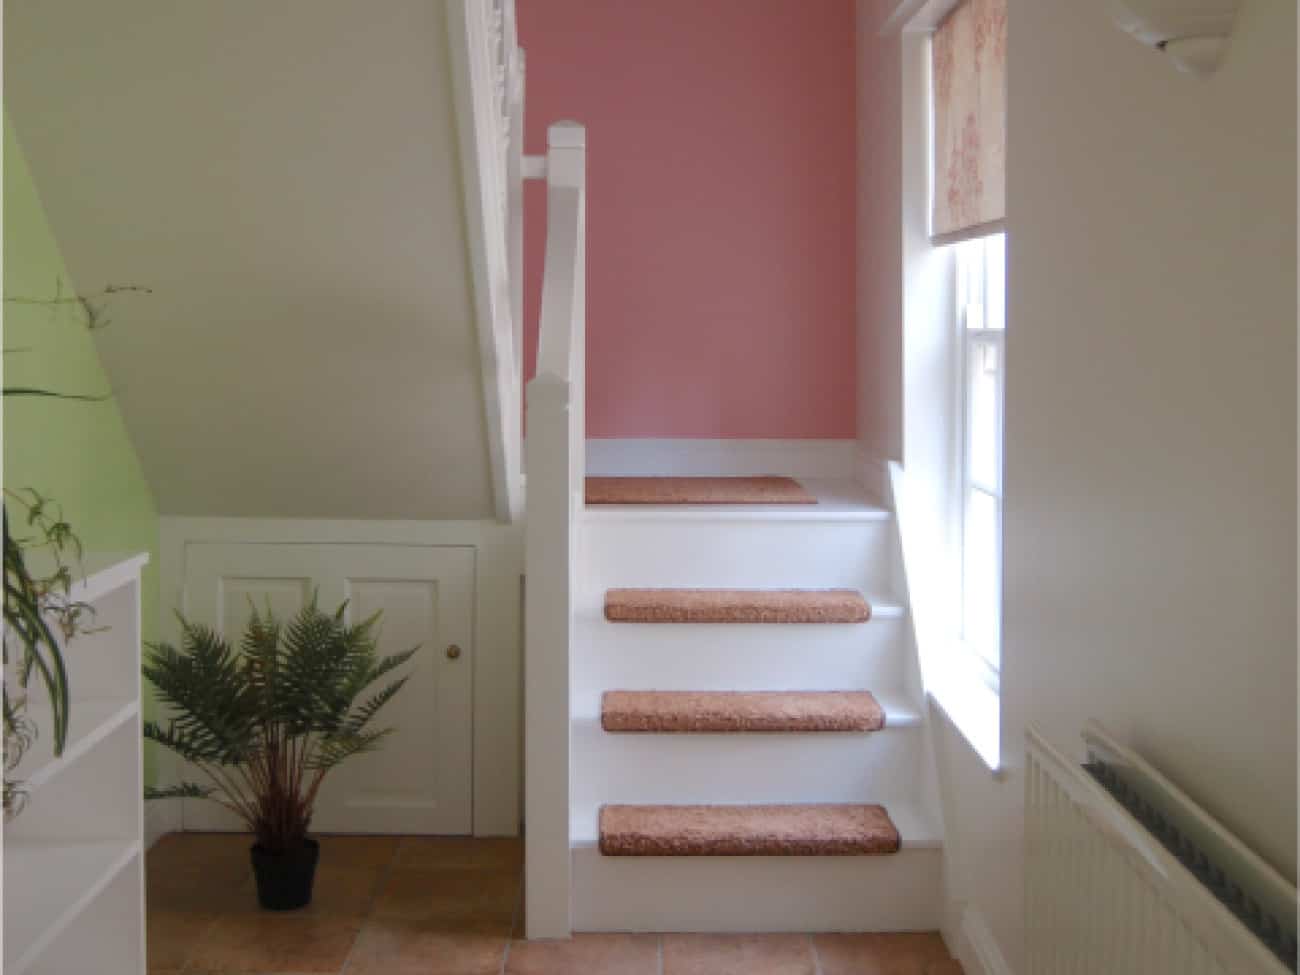 holiday home design in warwickshire dulux pink staircase wall seasonal soul home